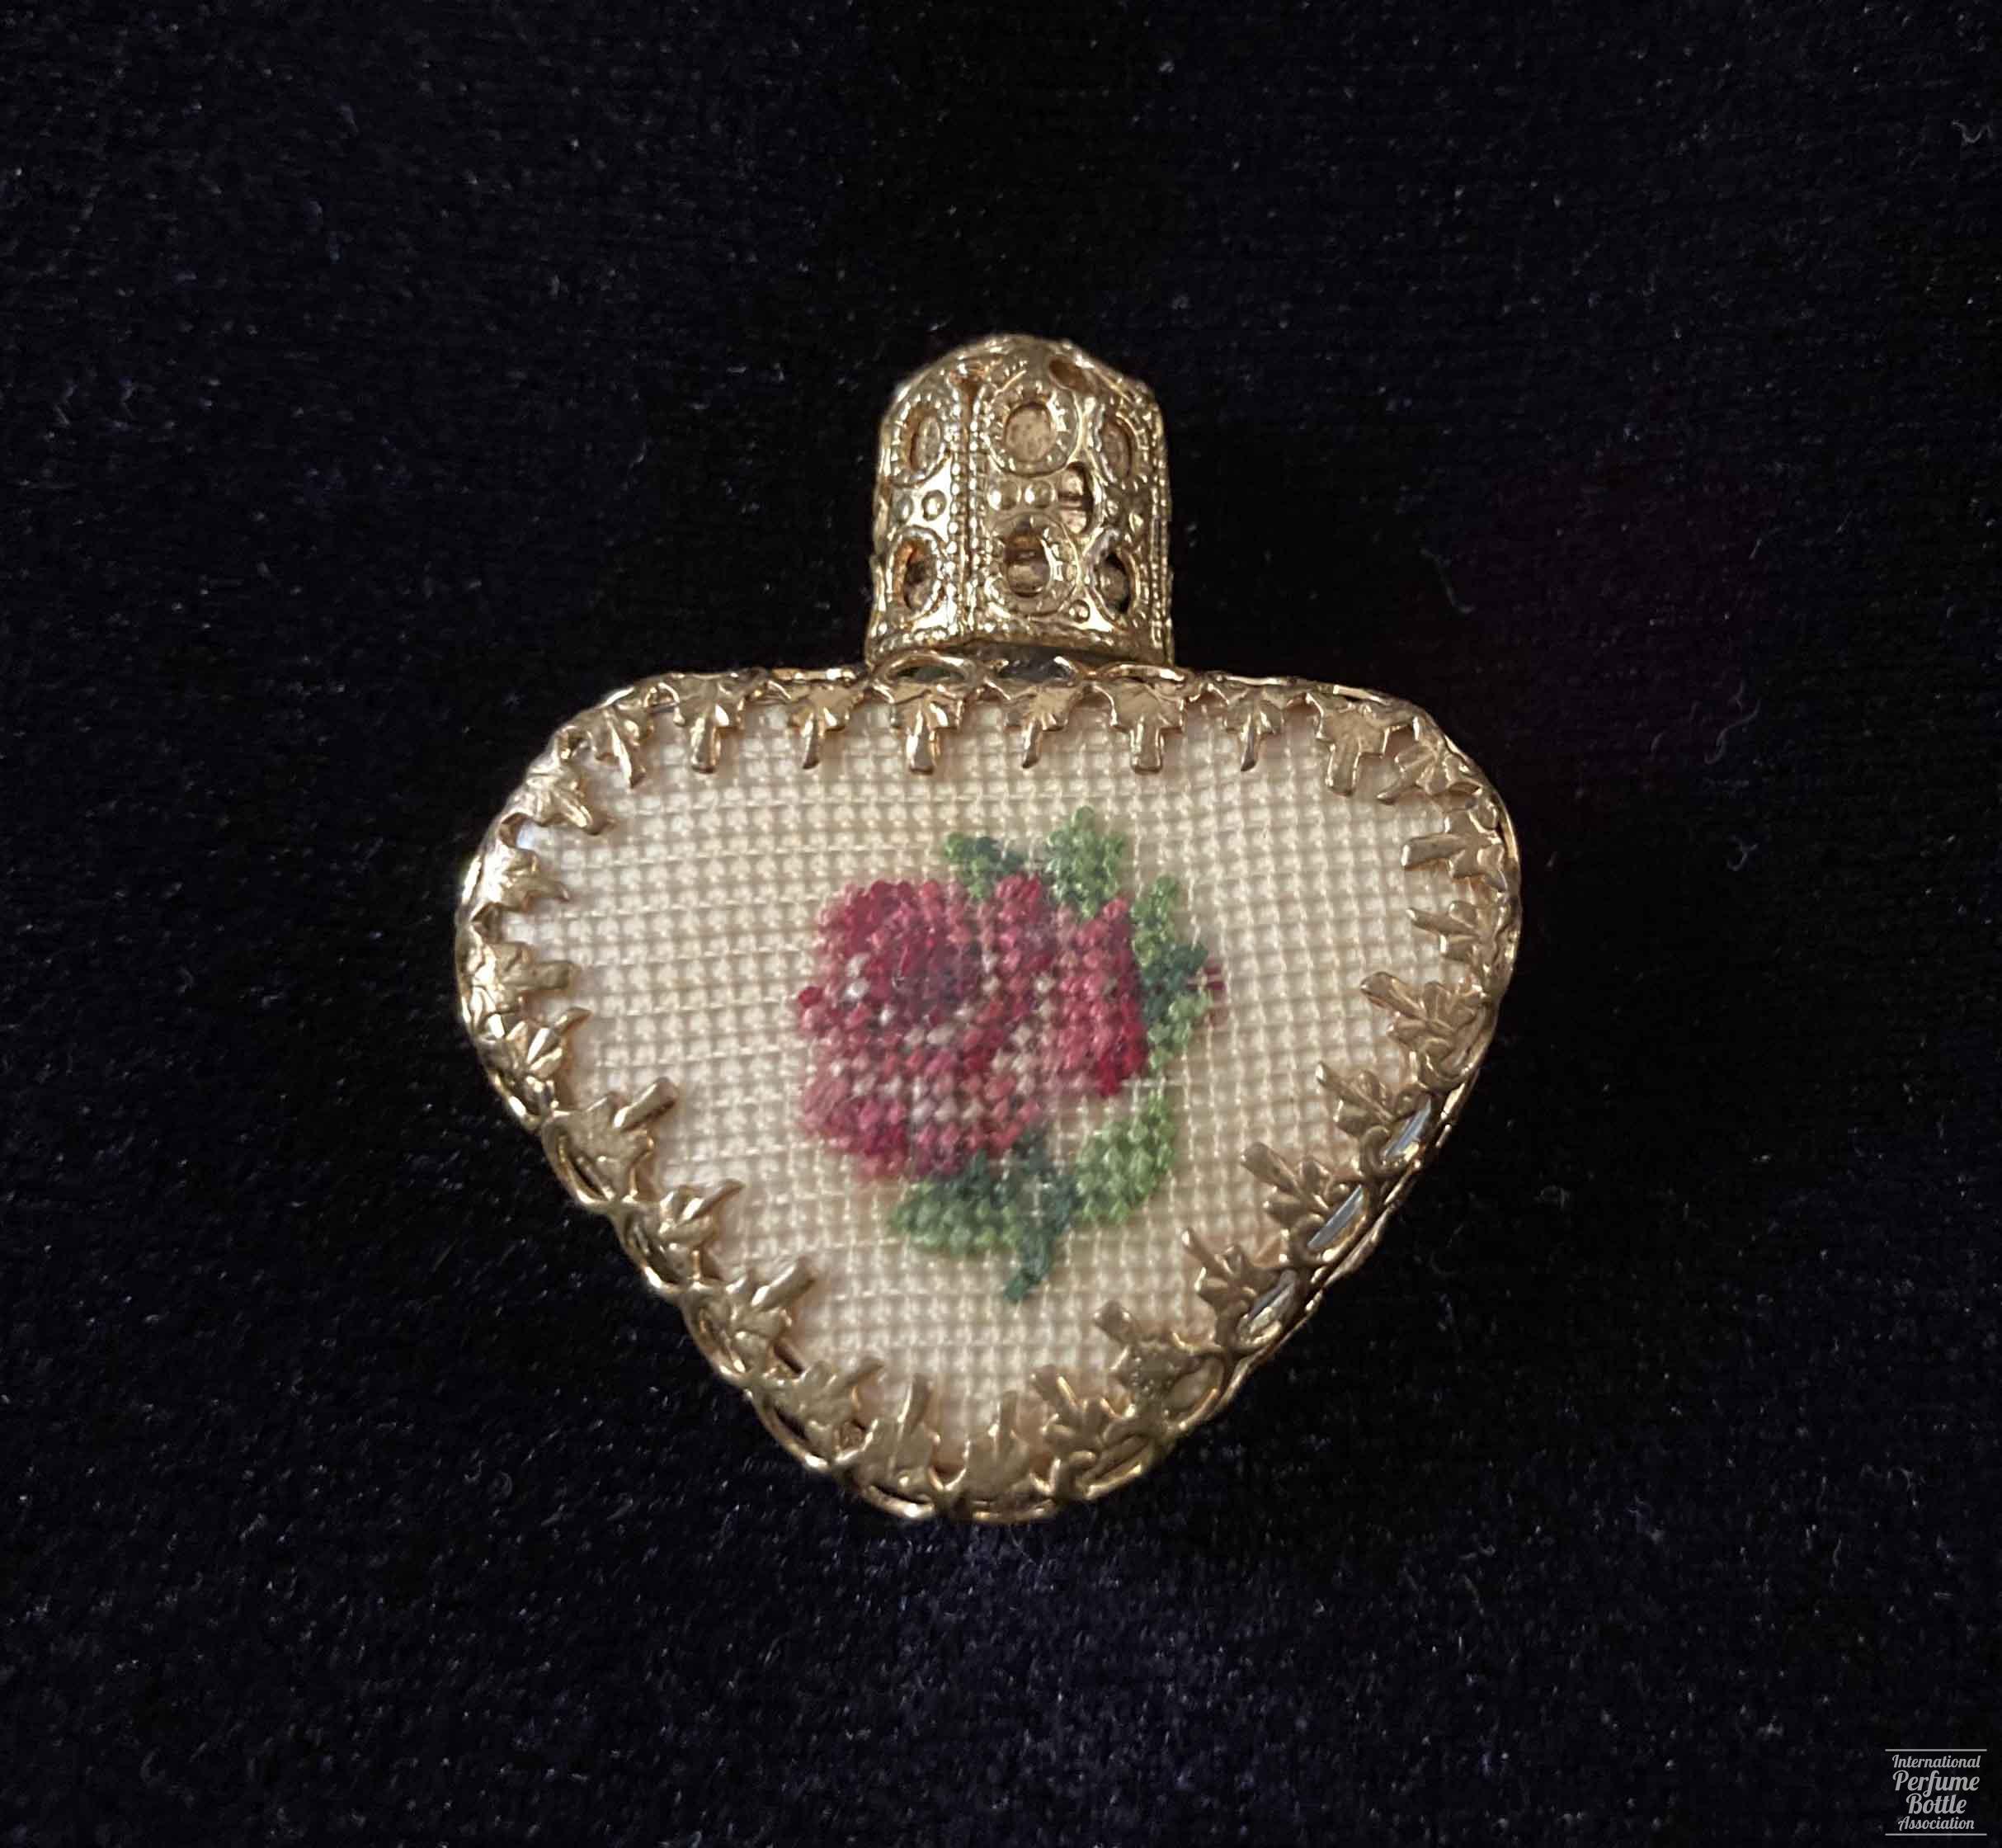 Heart-Shaped Bottle With Petit-Point Flower